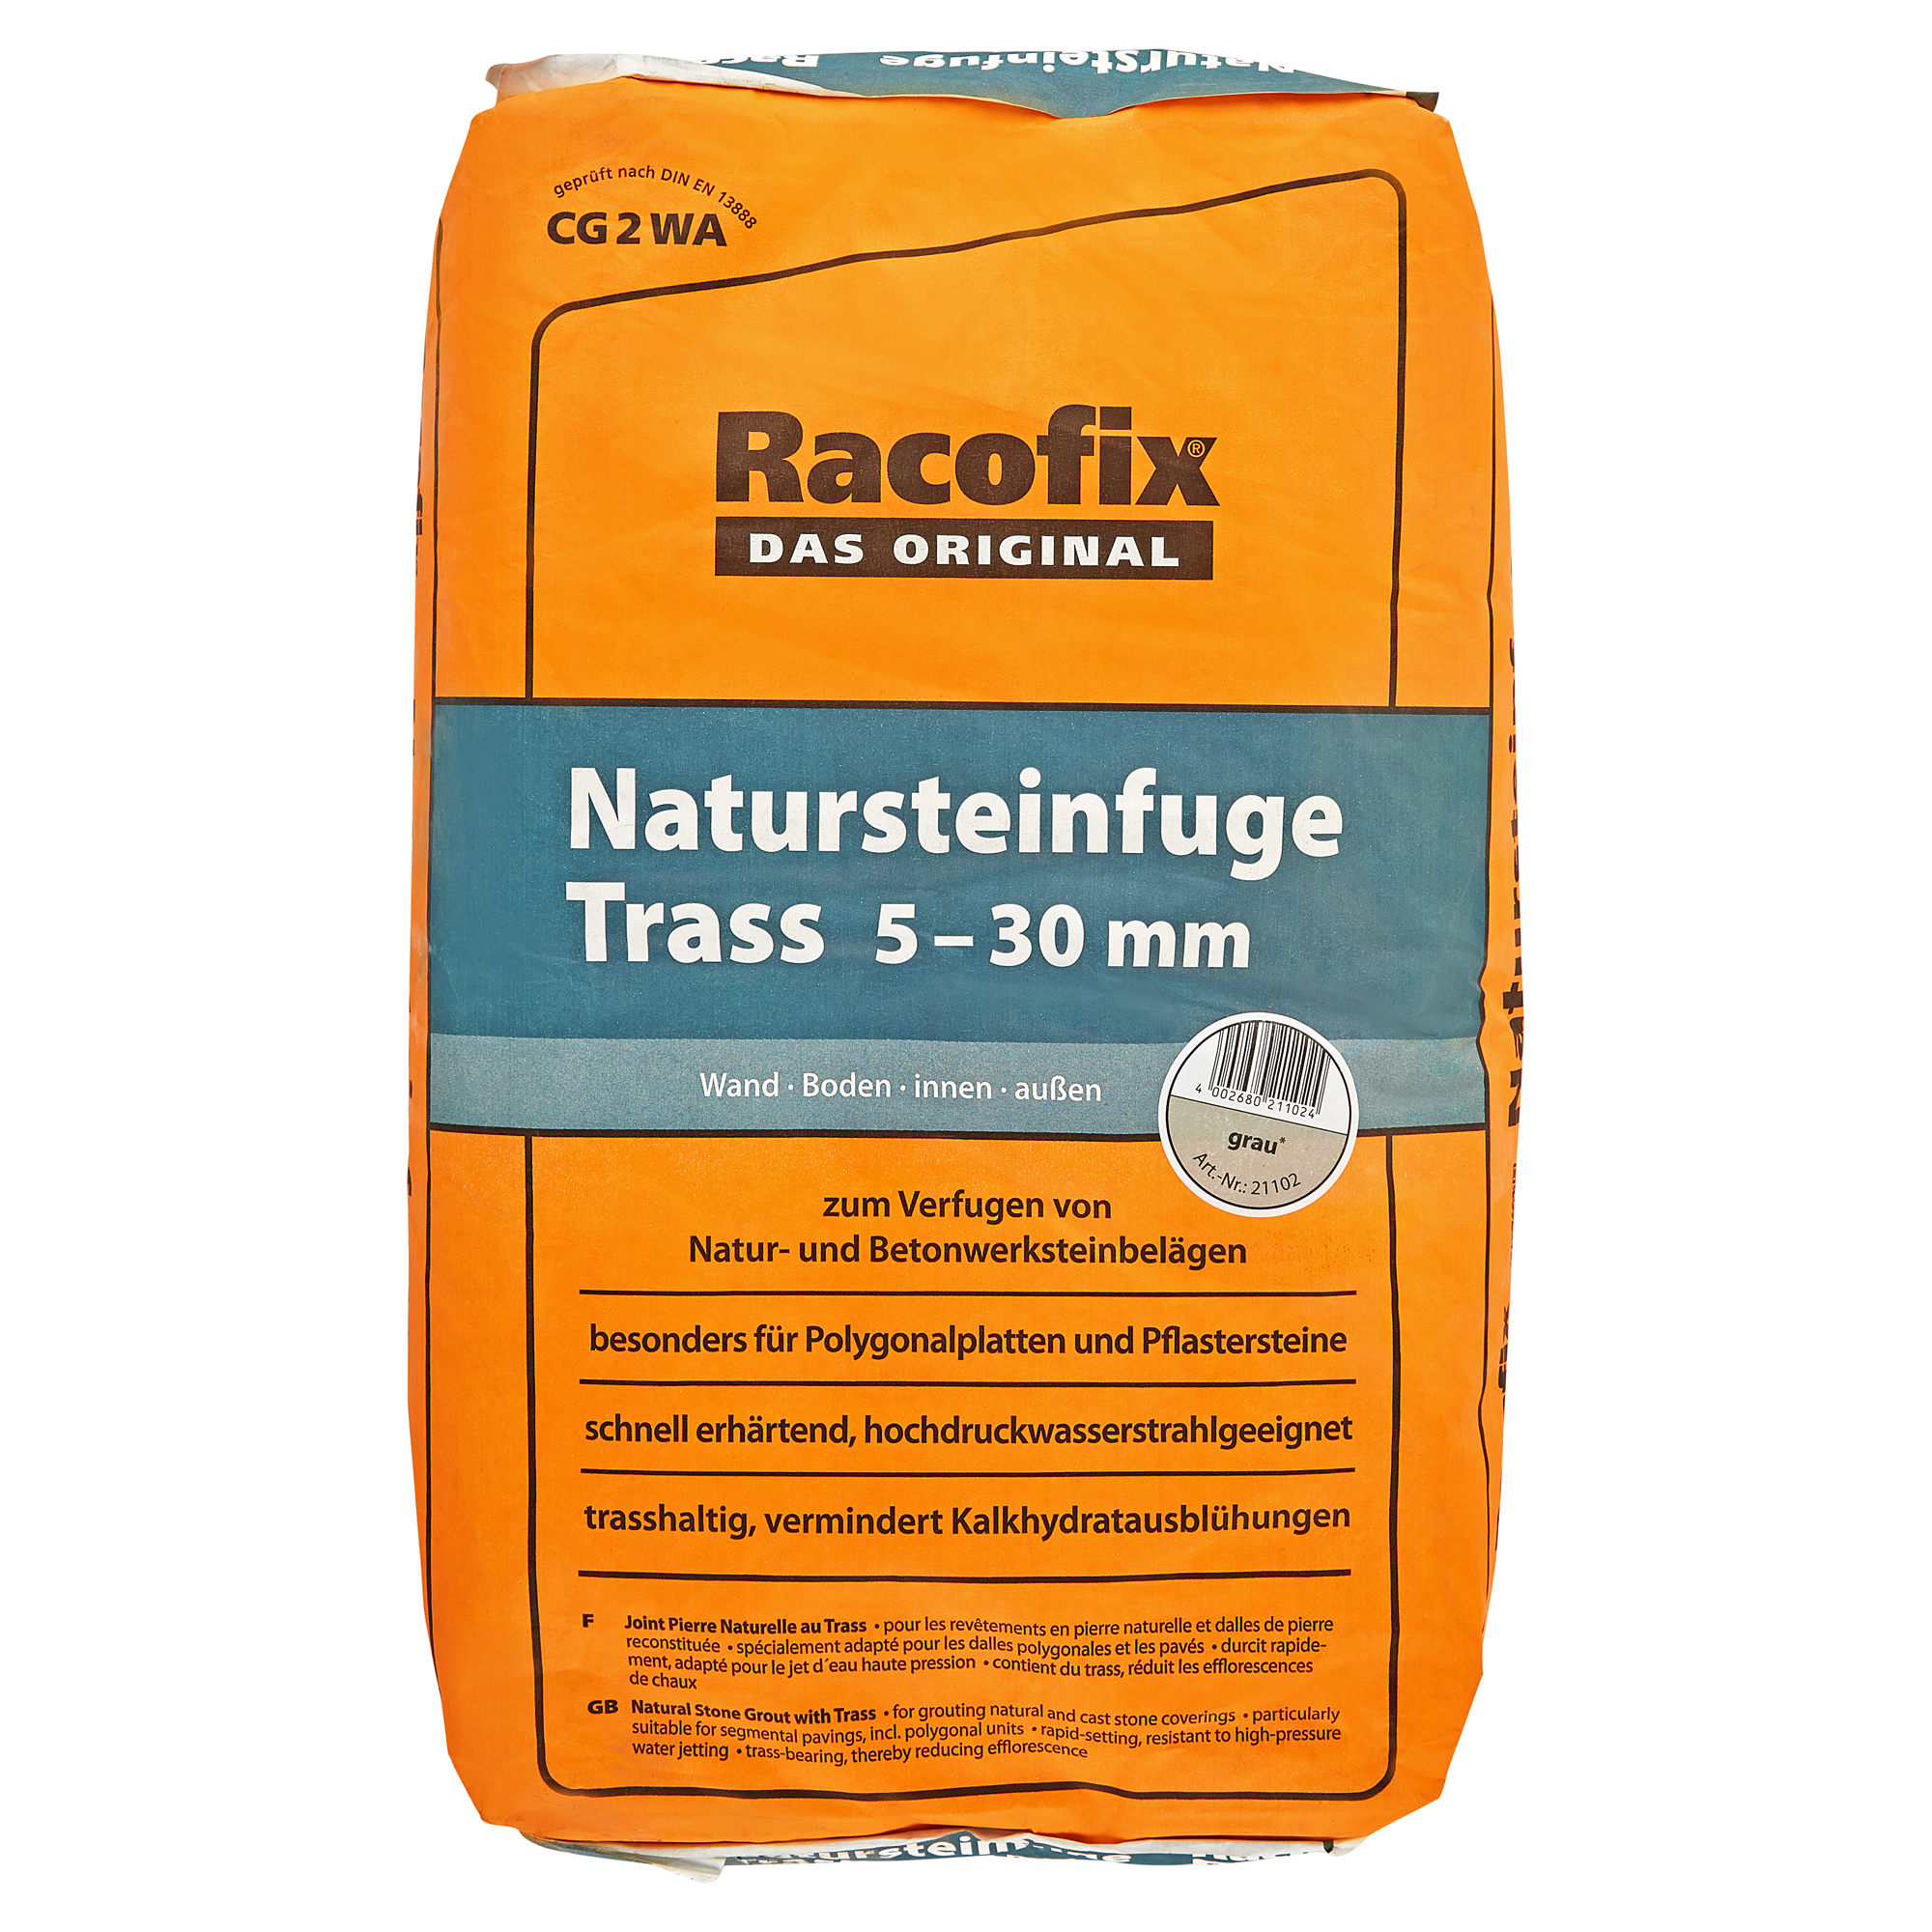 Natursteinfuge Trass grau 5 - 30 mm 25 kg + product picture